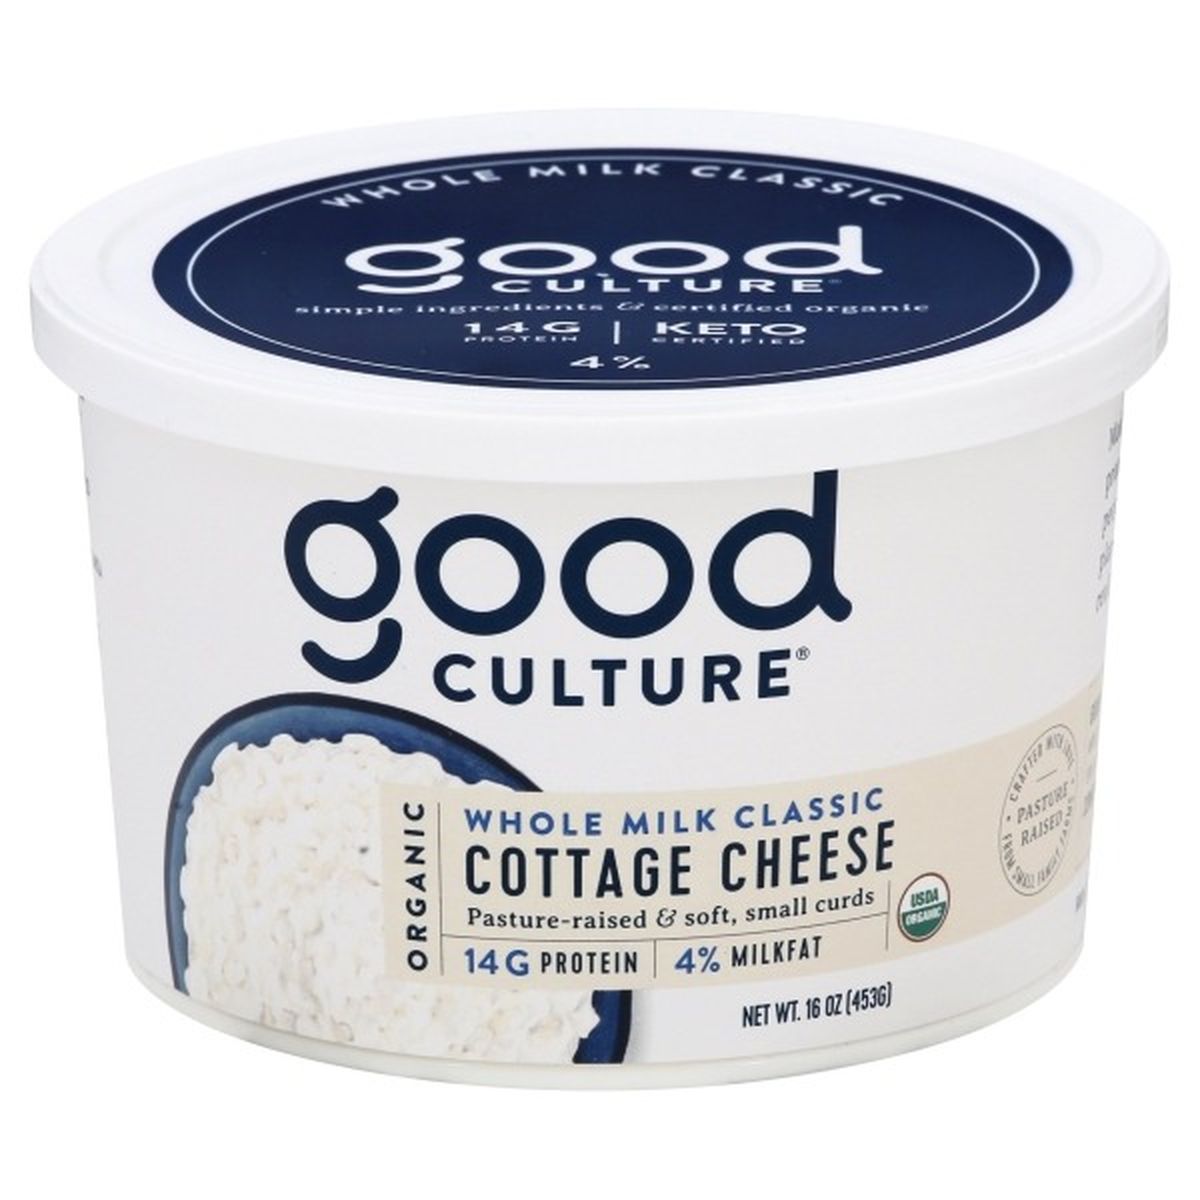 Calories in Good Culture Cottage Cheese, Small Curd, 4% Milkfat, Organic, Whole Milk Classic